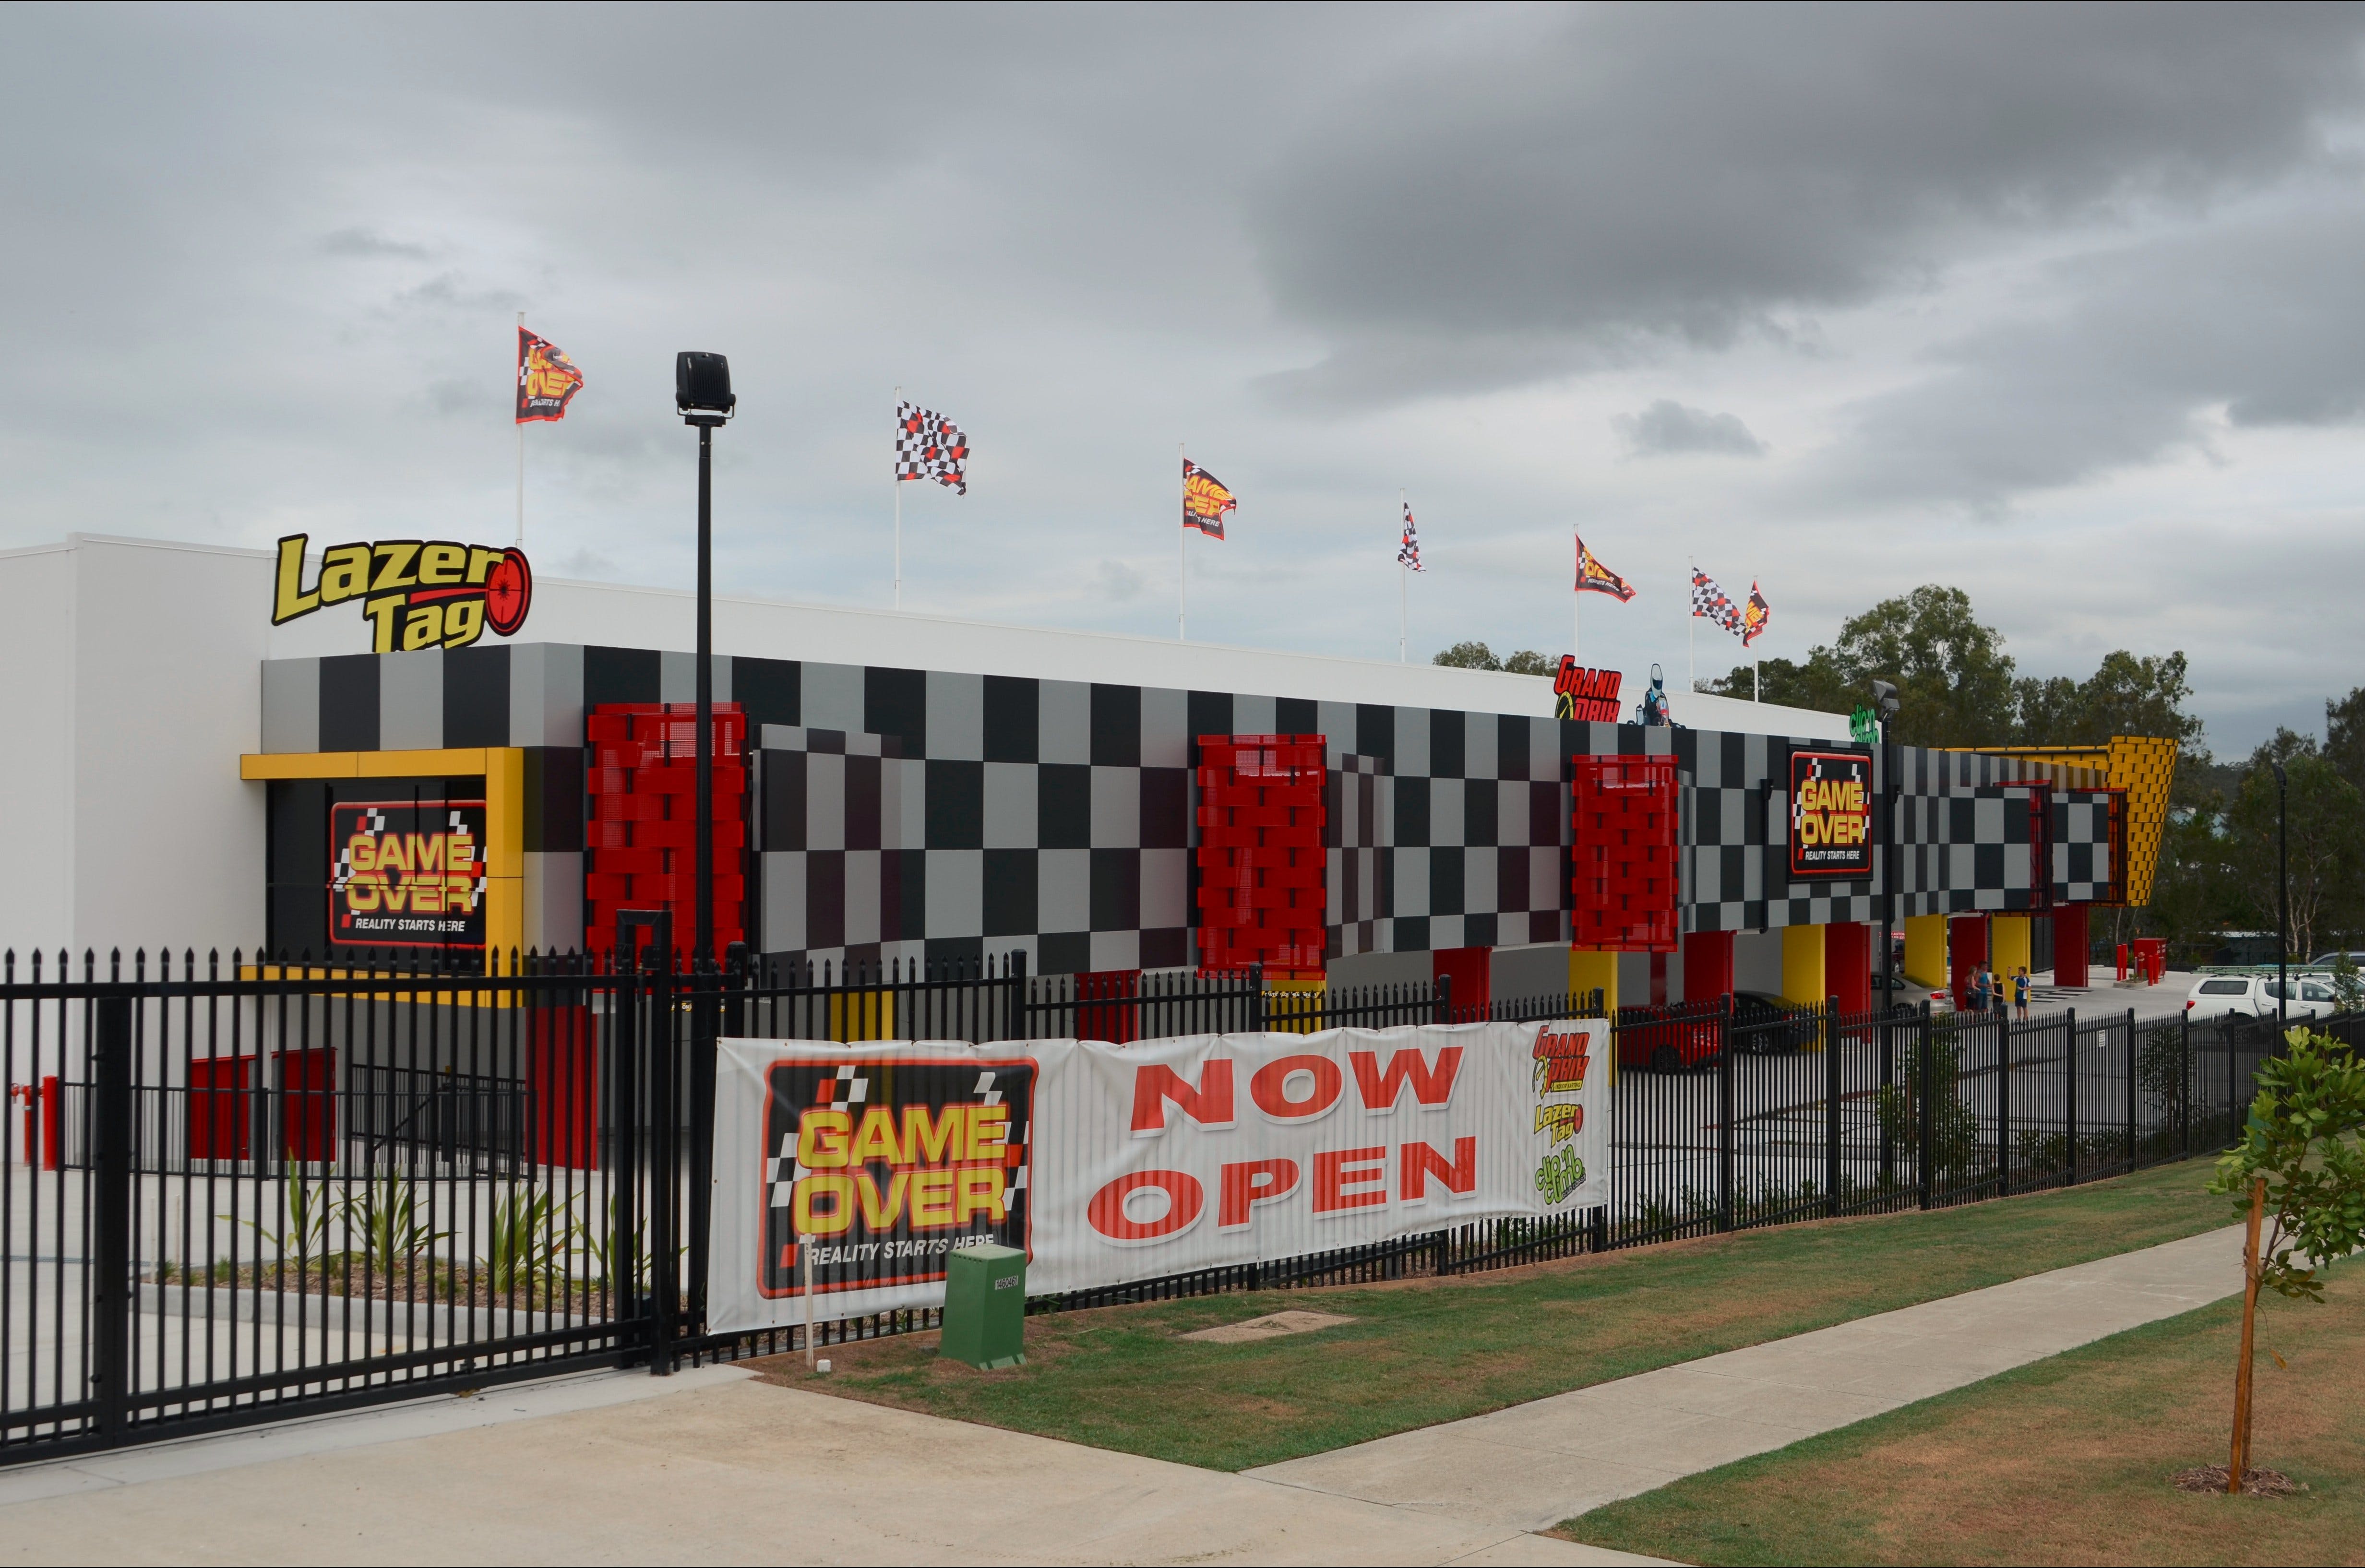 Game Over Indoor Go Karting Adventure Climbing Walls and Lazer Tag Centre - Tourism Adelaide